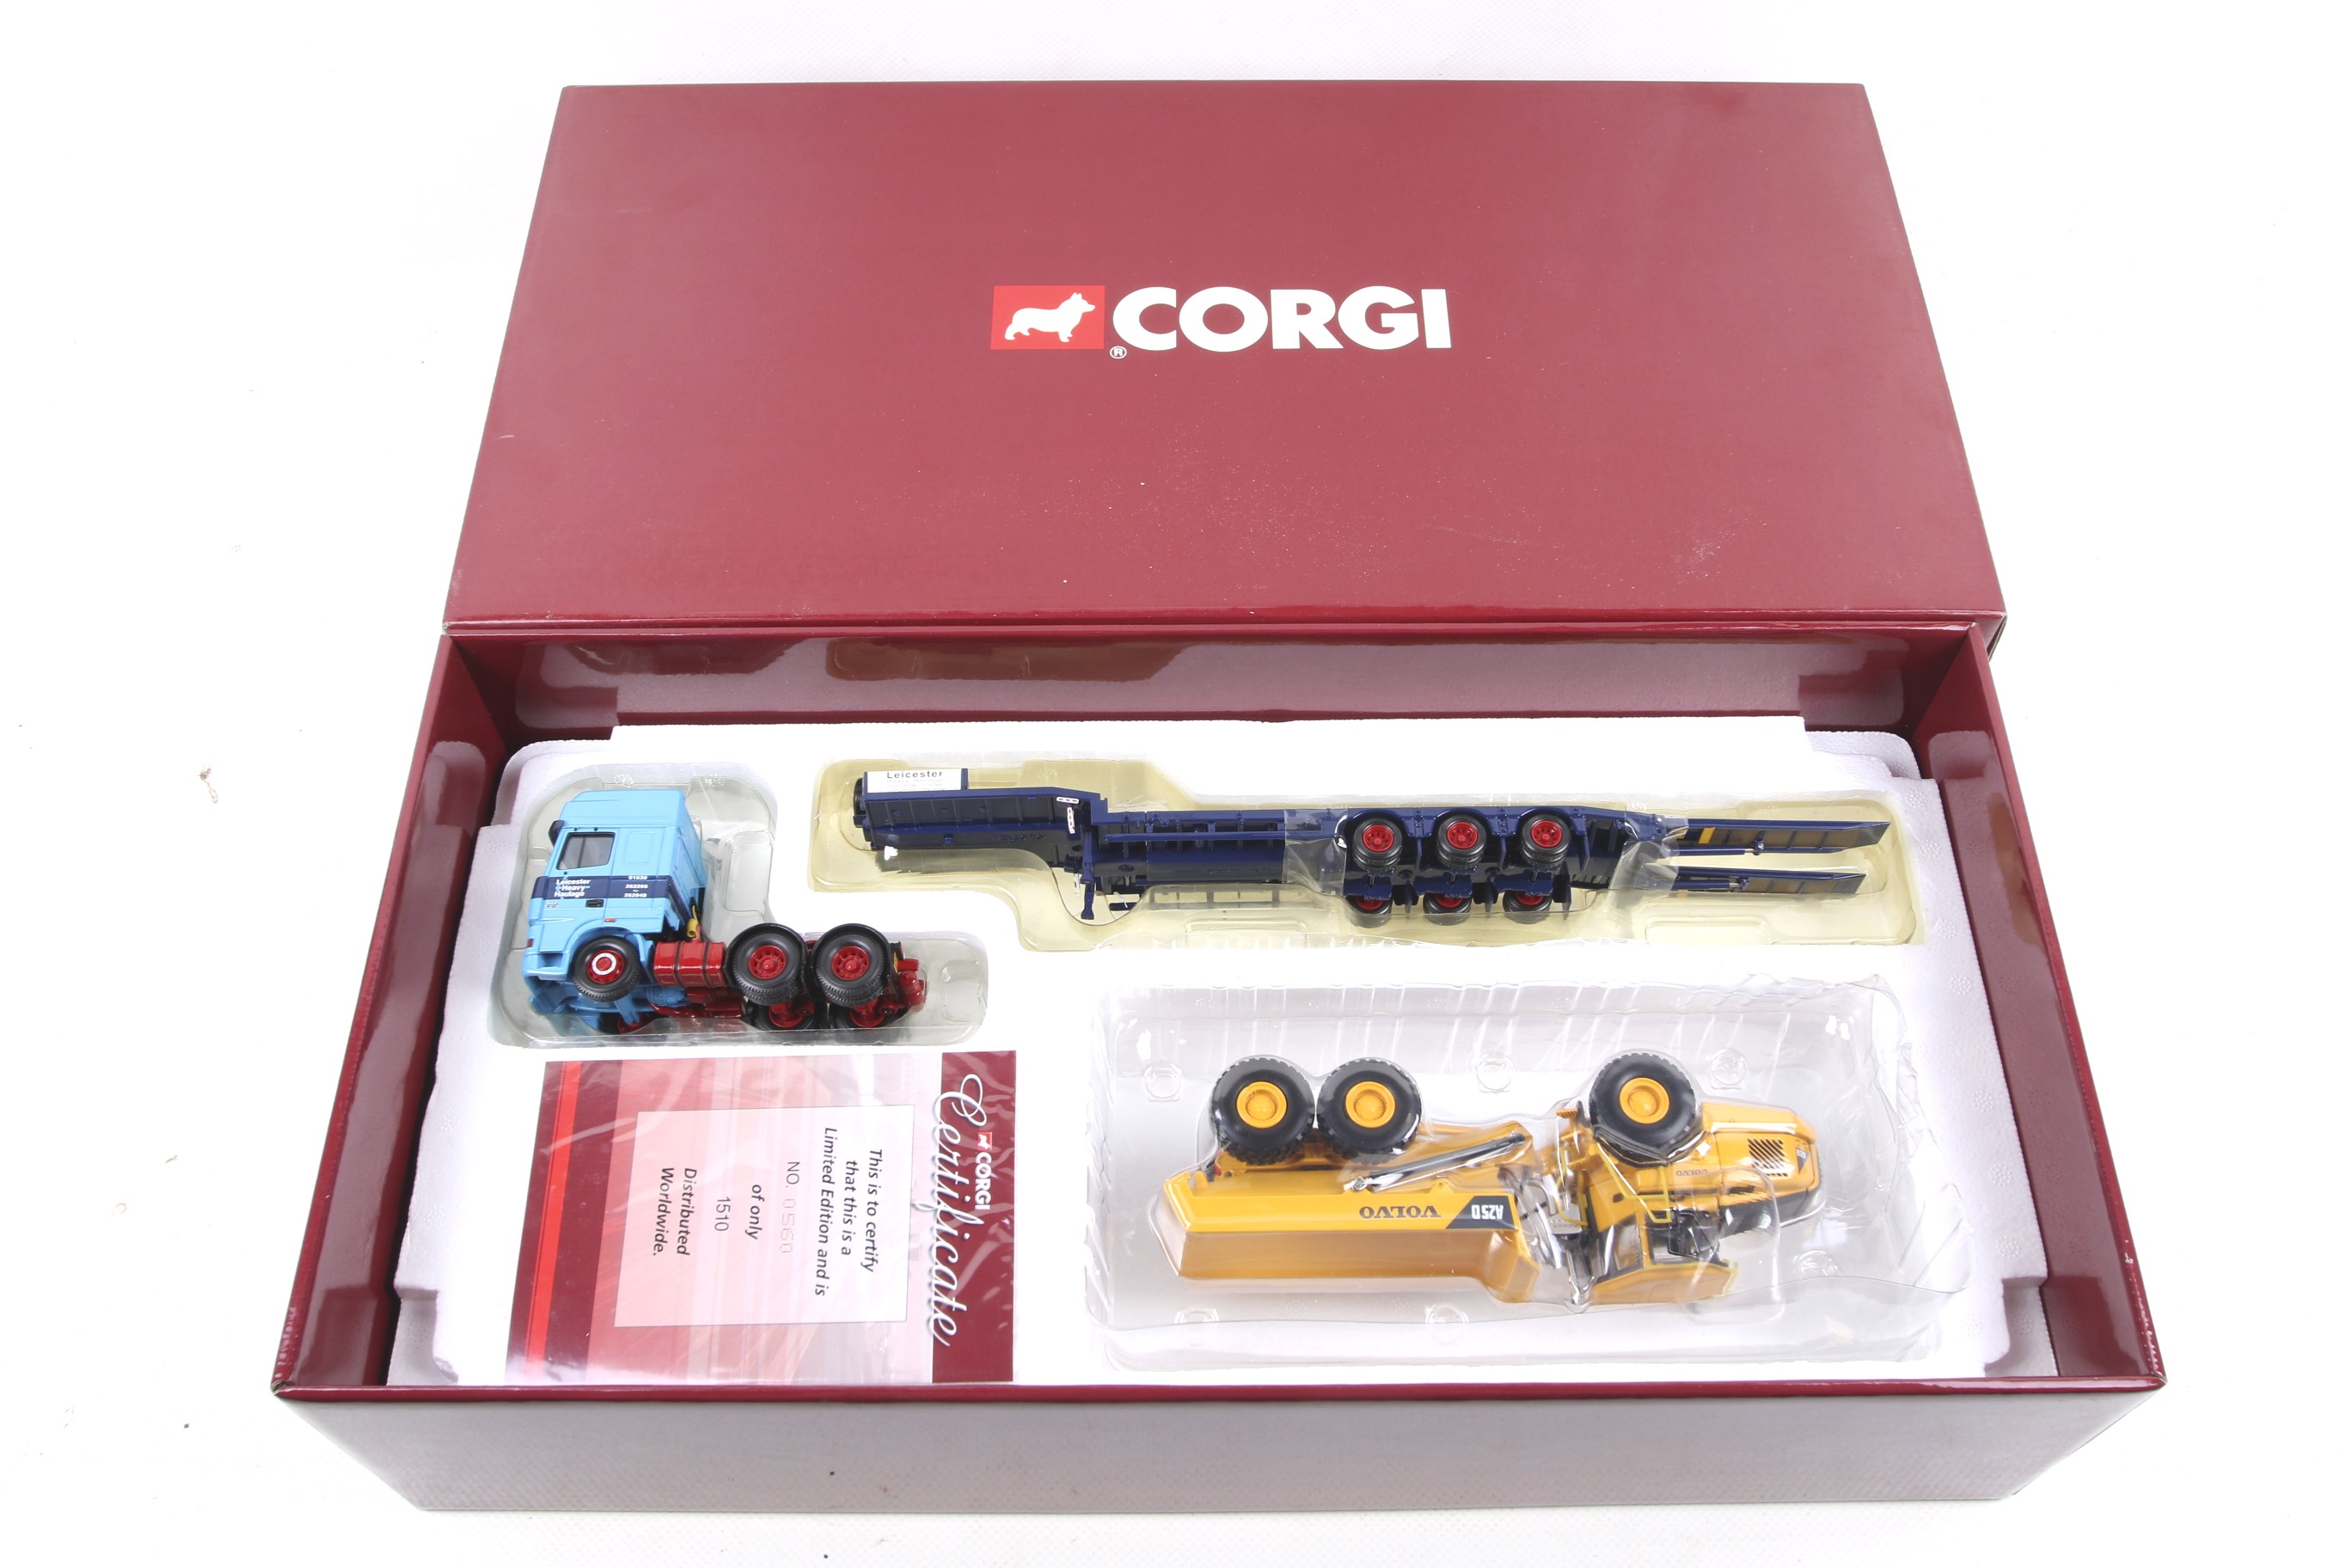 A Corgi Heavy Haulage 1:50 scale diecast DAF XF lorry and Trailer with a Volvo A25D Articulated